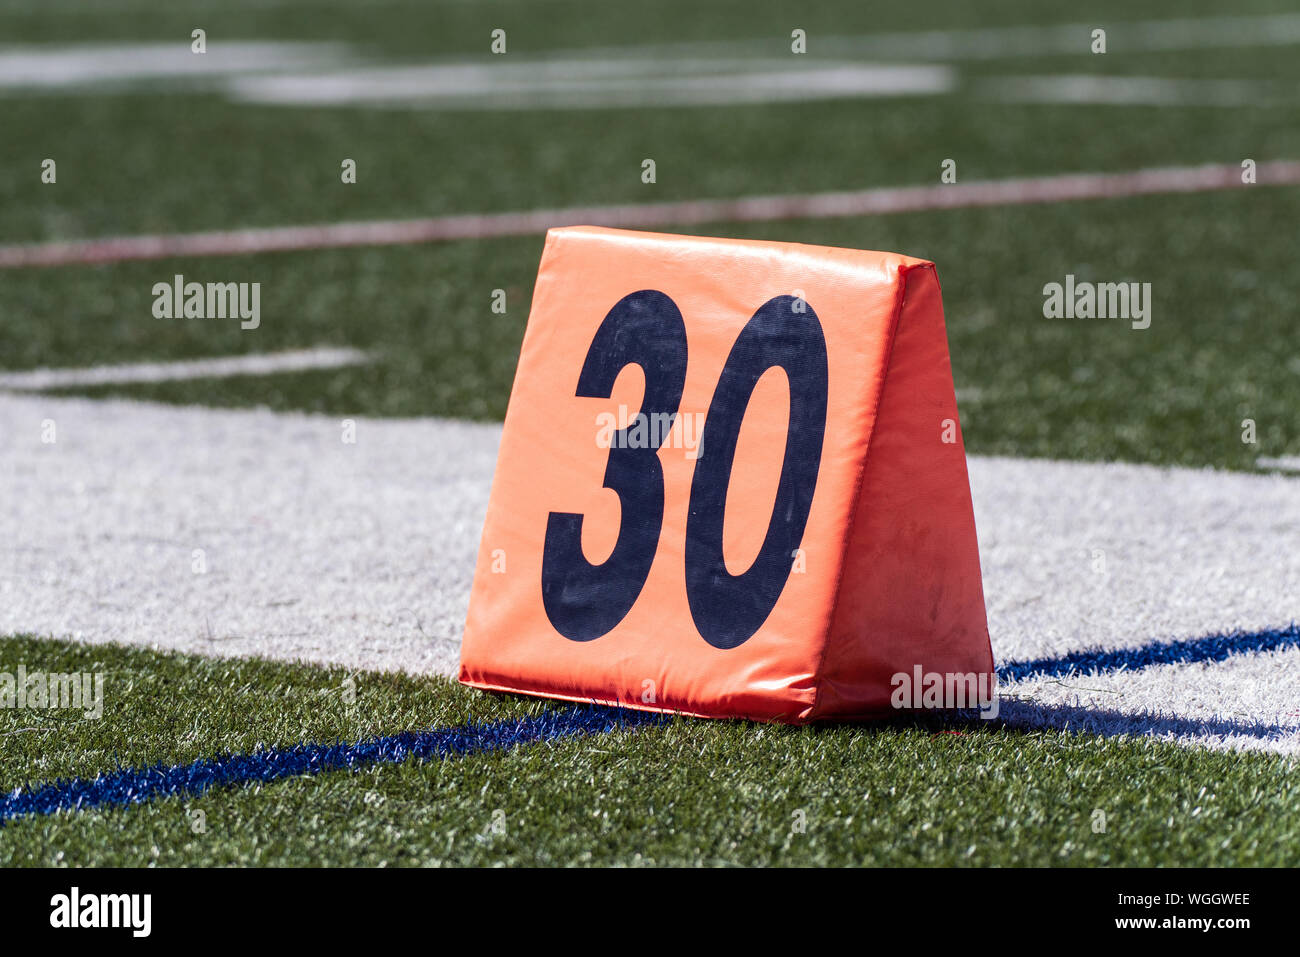 Football 30 yard line is shown just outside the sideline. Stock Photo